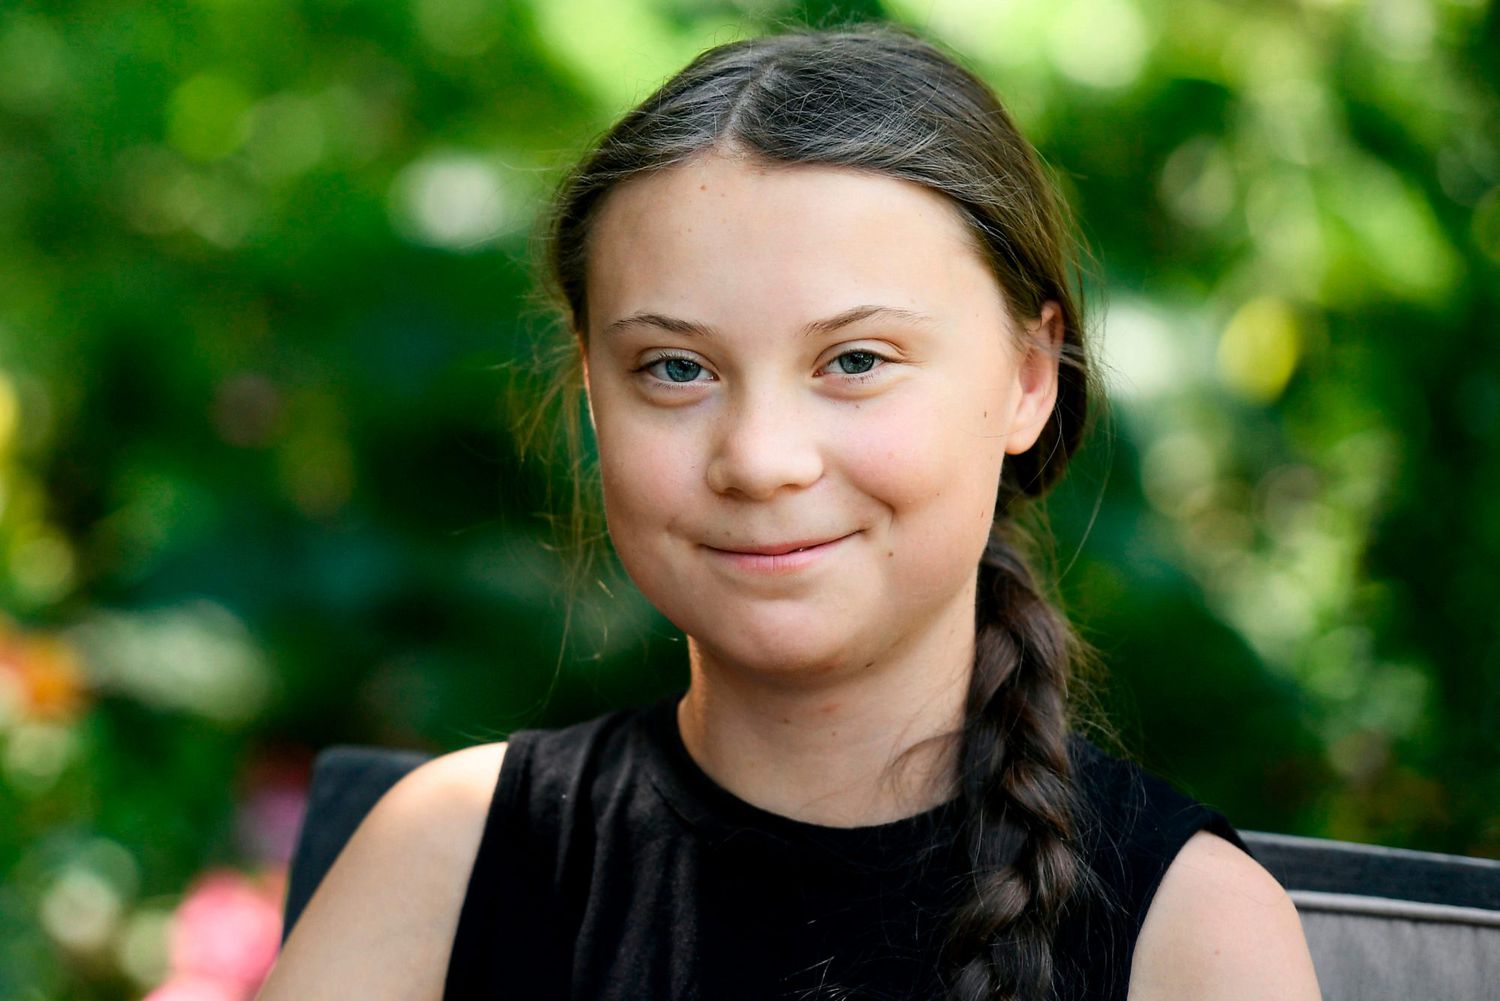 Greta Thunberg quote: We need action Greta Thunberg Shirt for kids and adults Not hope Climate Change Shirt